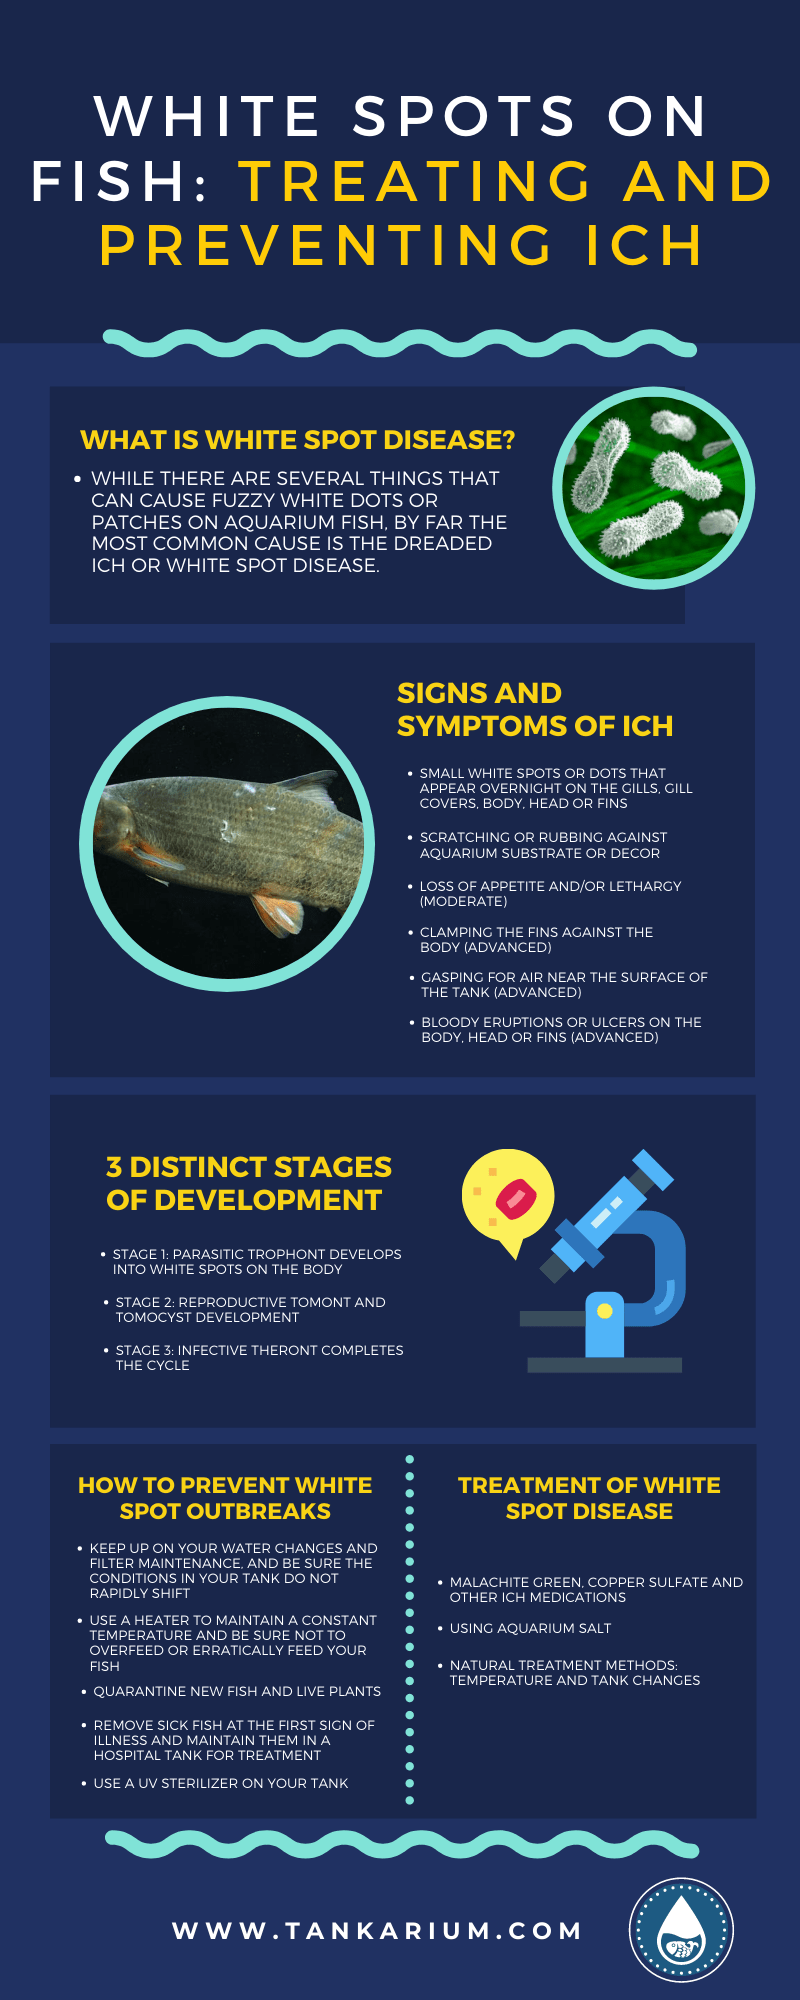 White Spots on Fish: Treating and Preventing Ich - Infographic